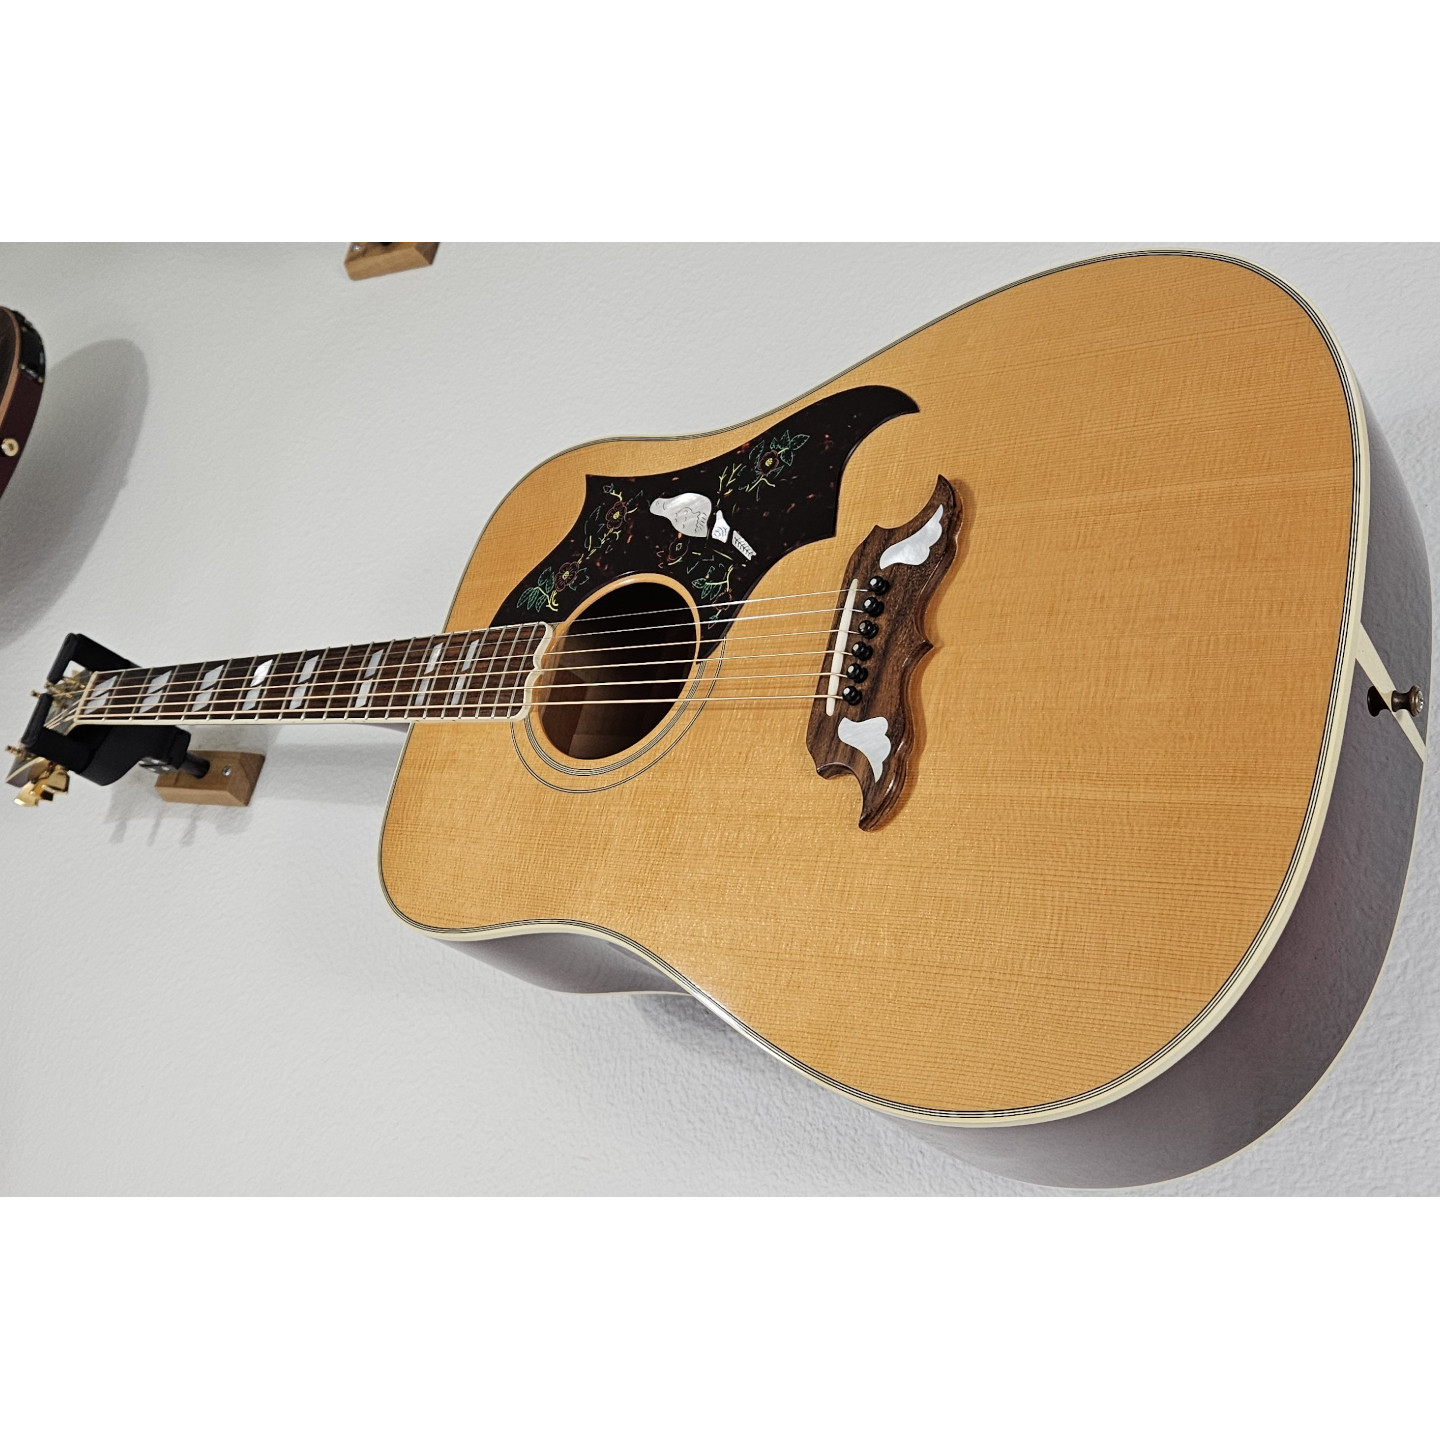 1997 Gibson Custom Shop Dove In Flight Limited Edition Acoustic Guitar